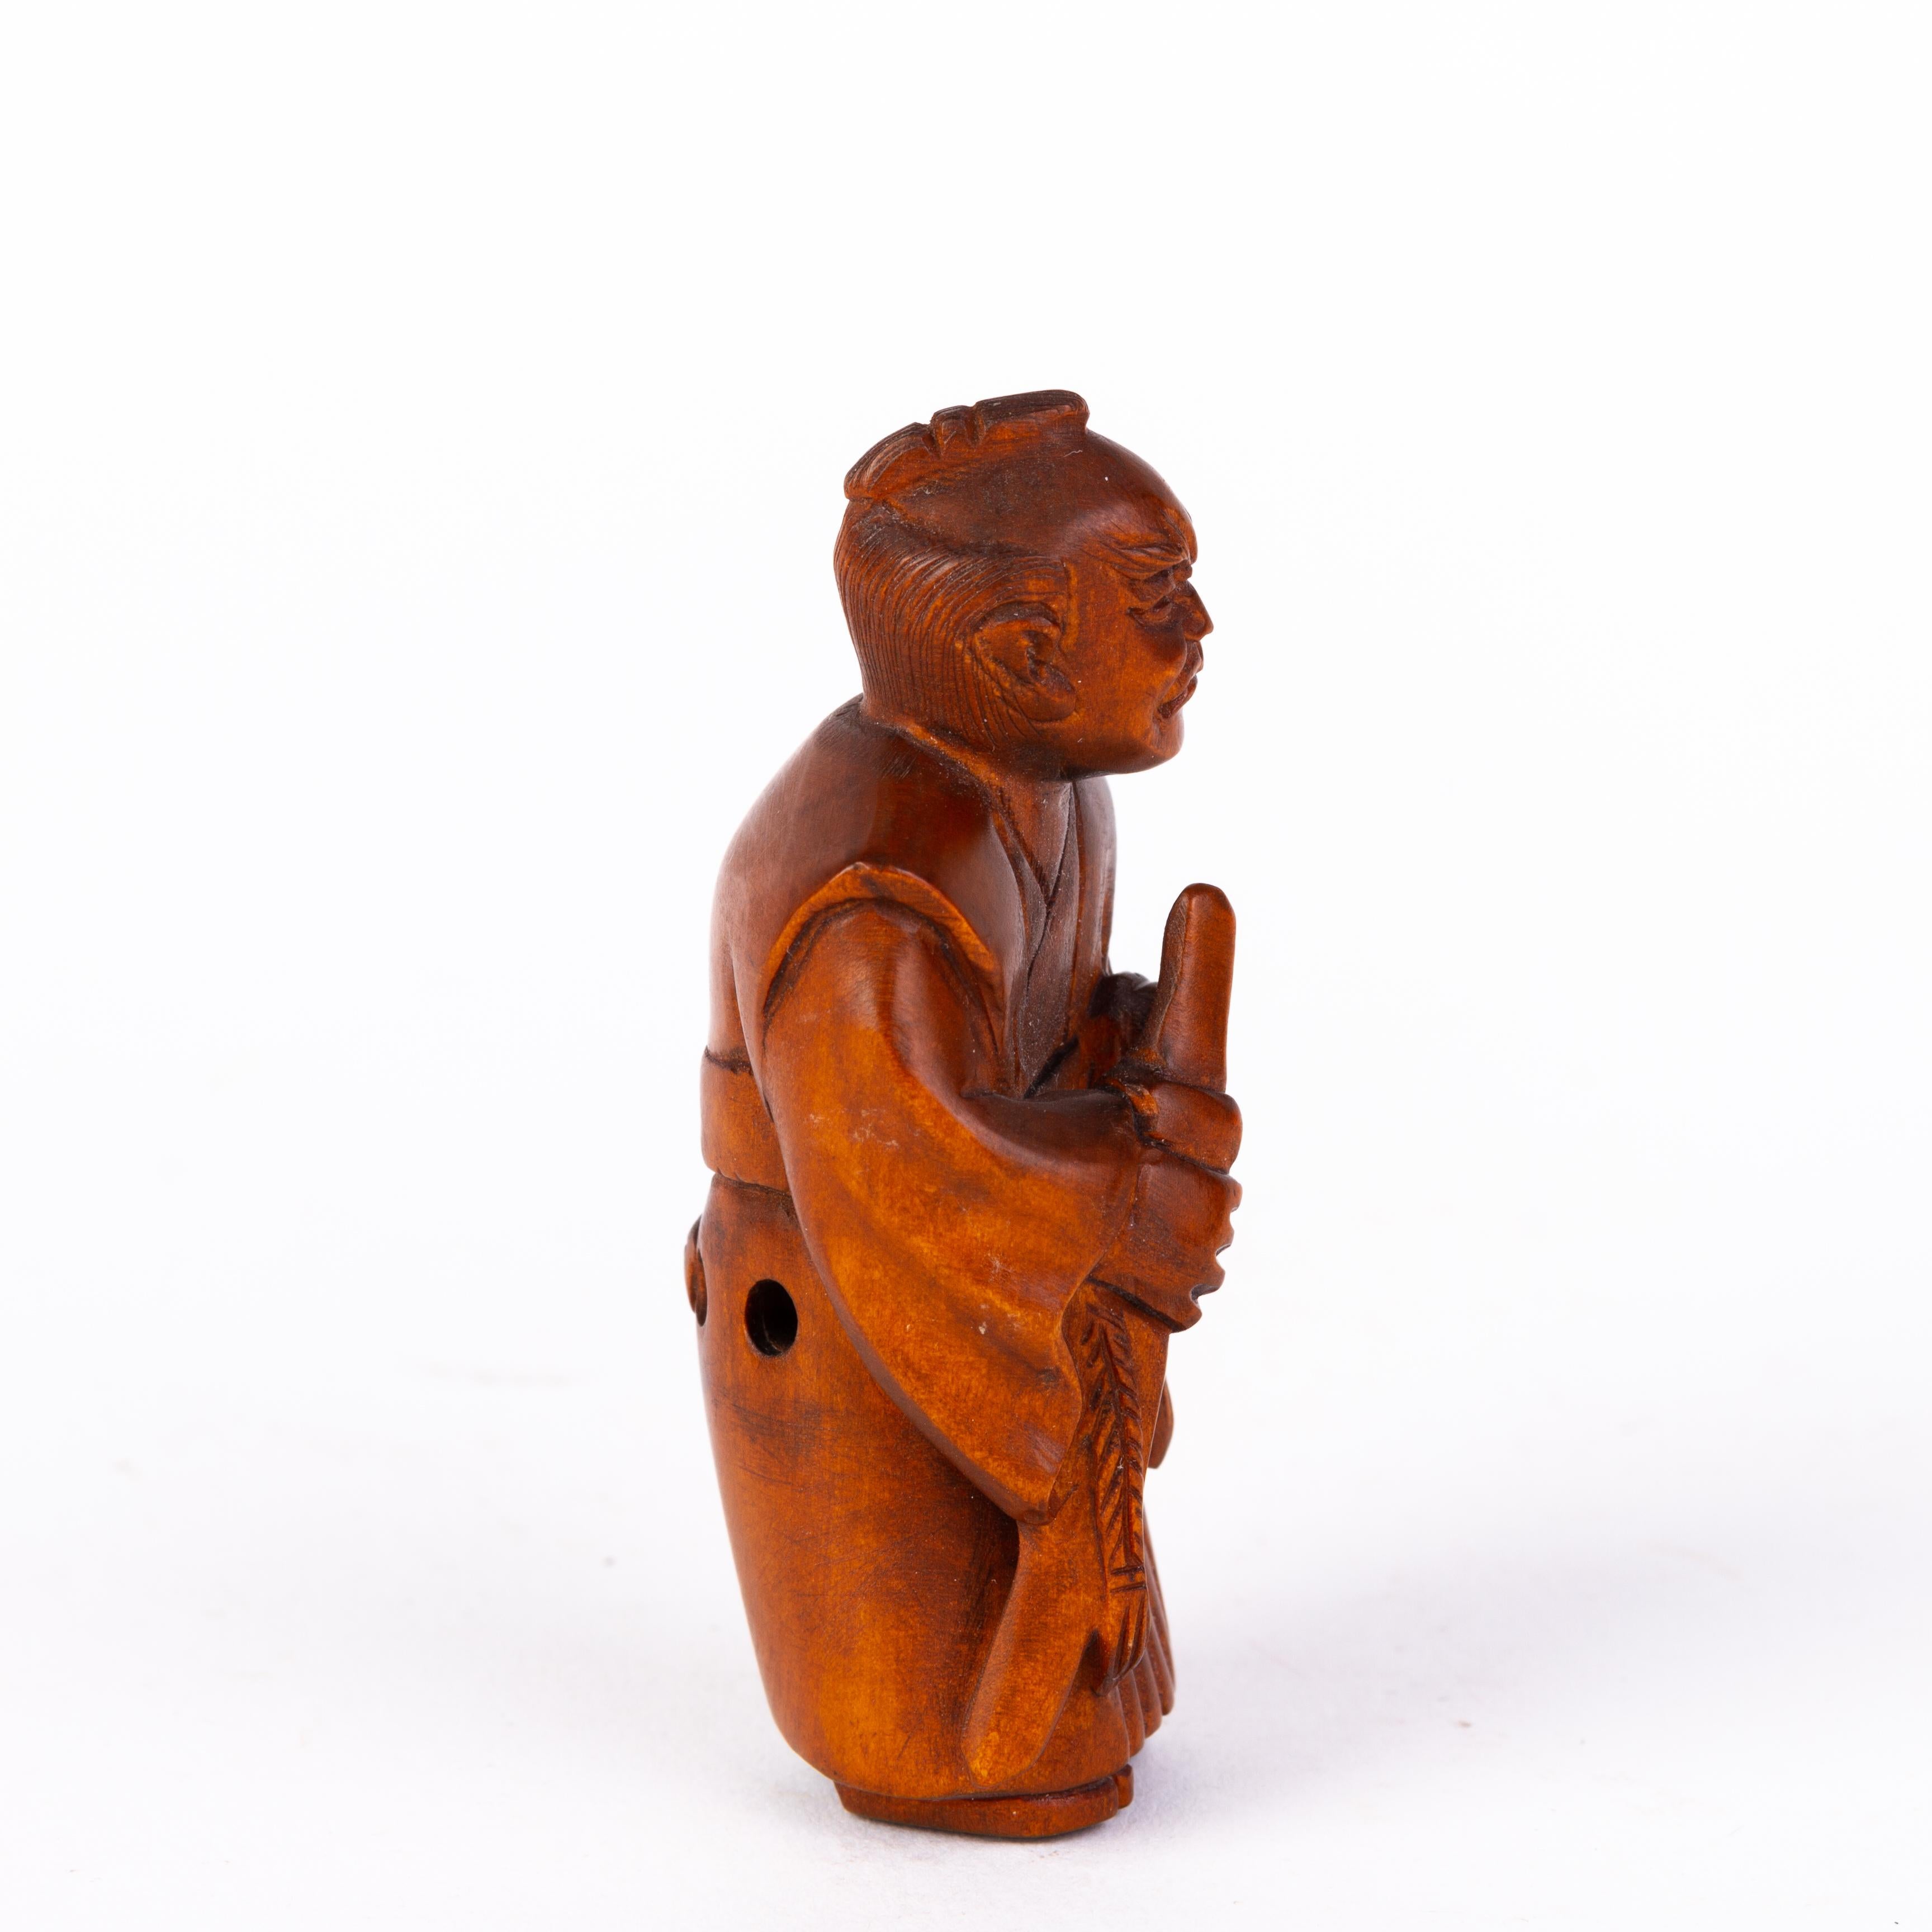 Japanese Carved Boxwood Netsuke Inro Ojime
Very good condition.
From a private collection.
Free international shipping.